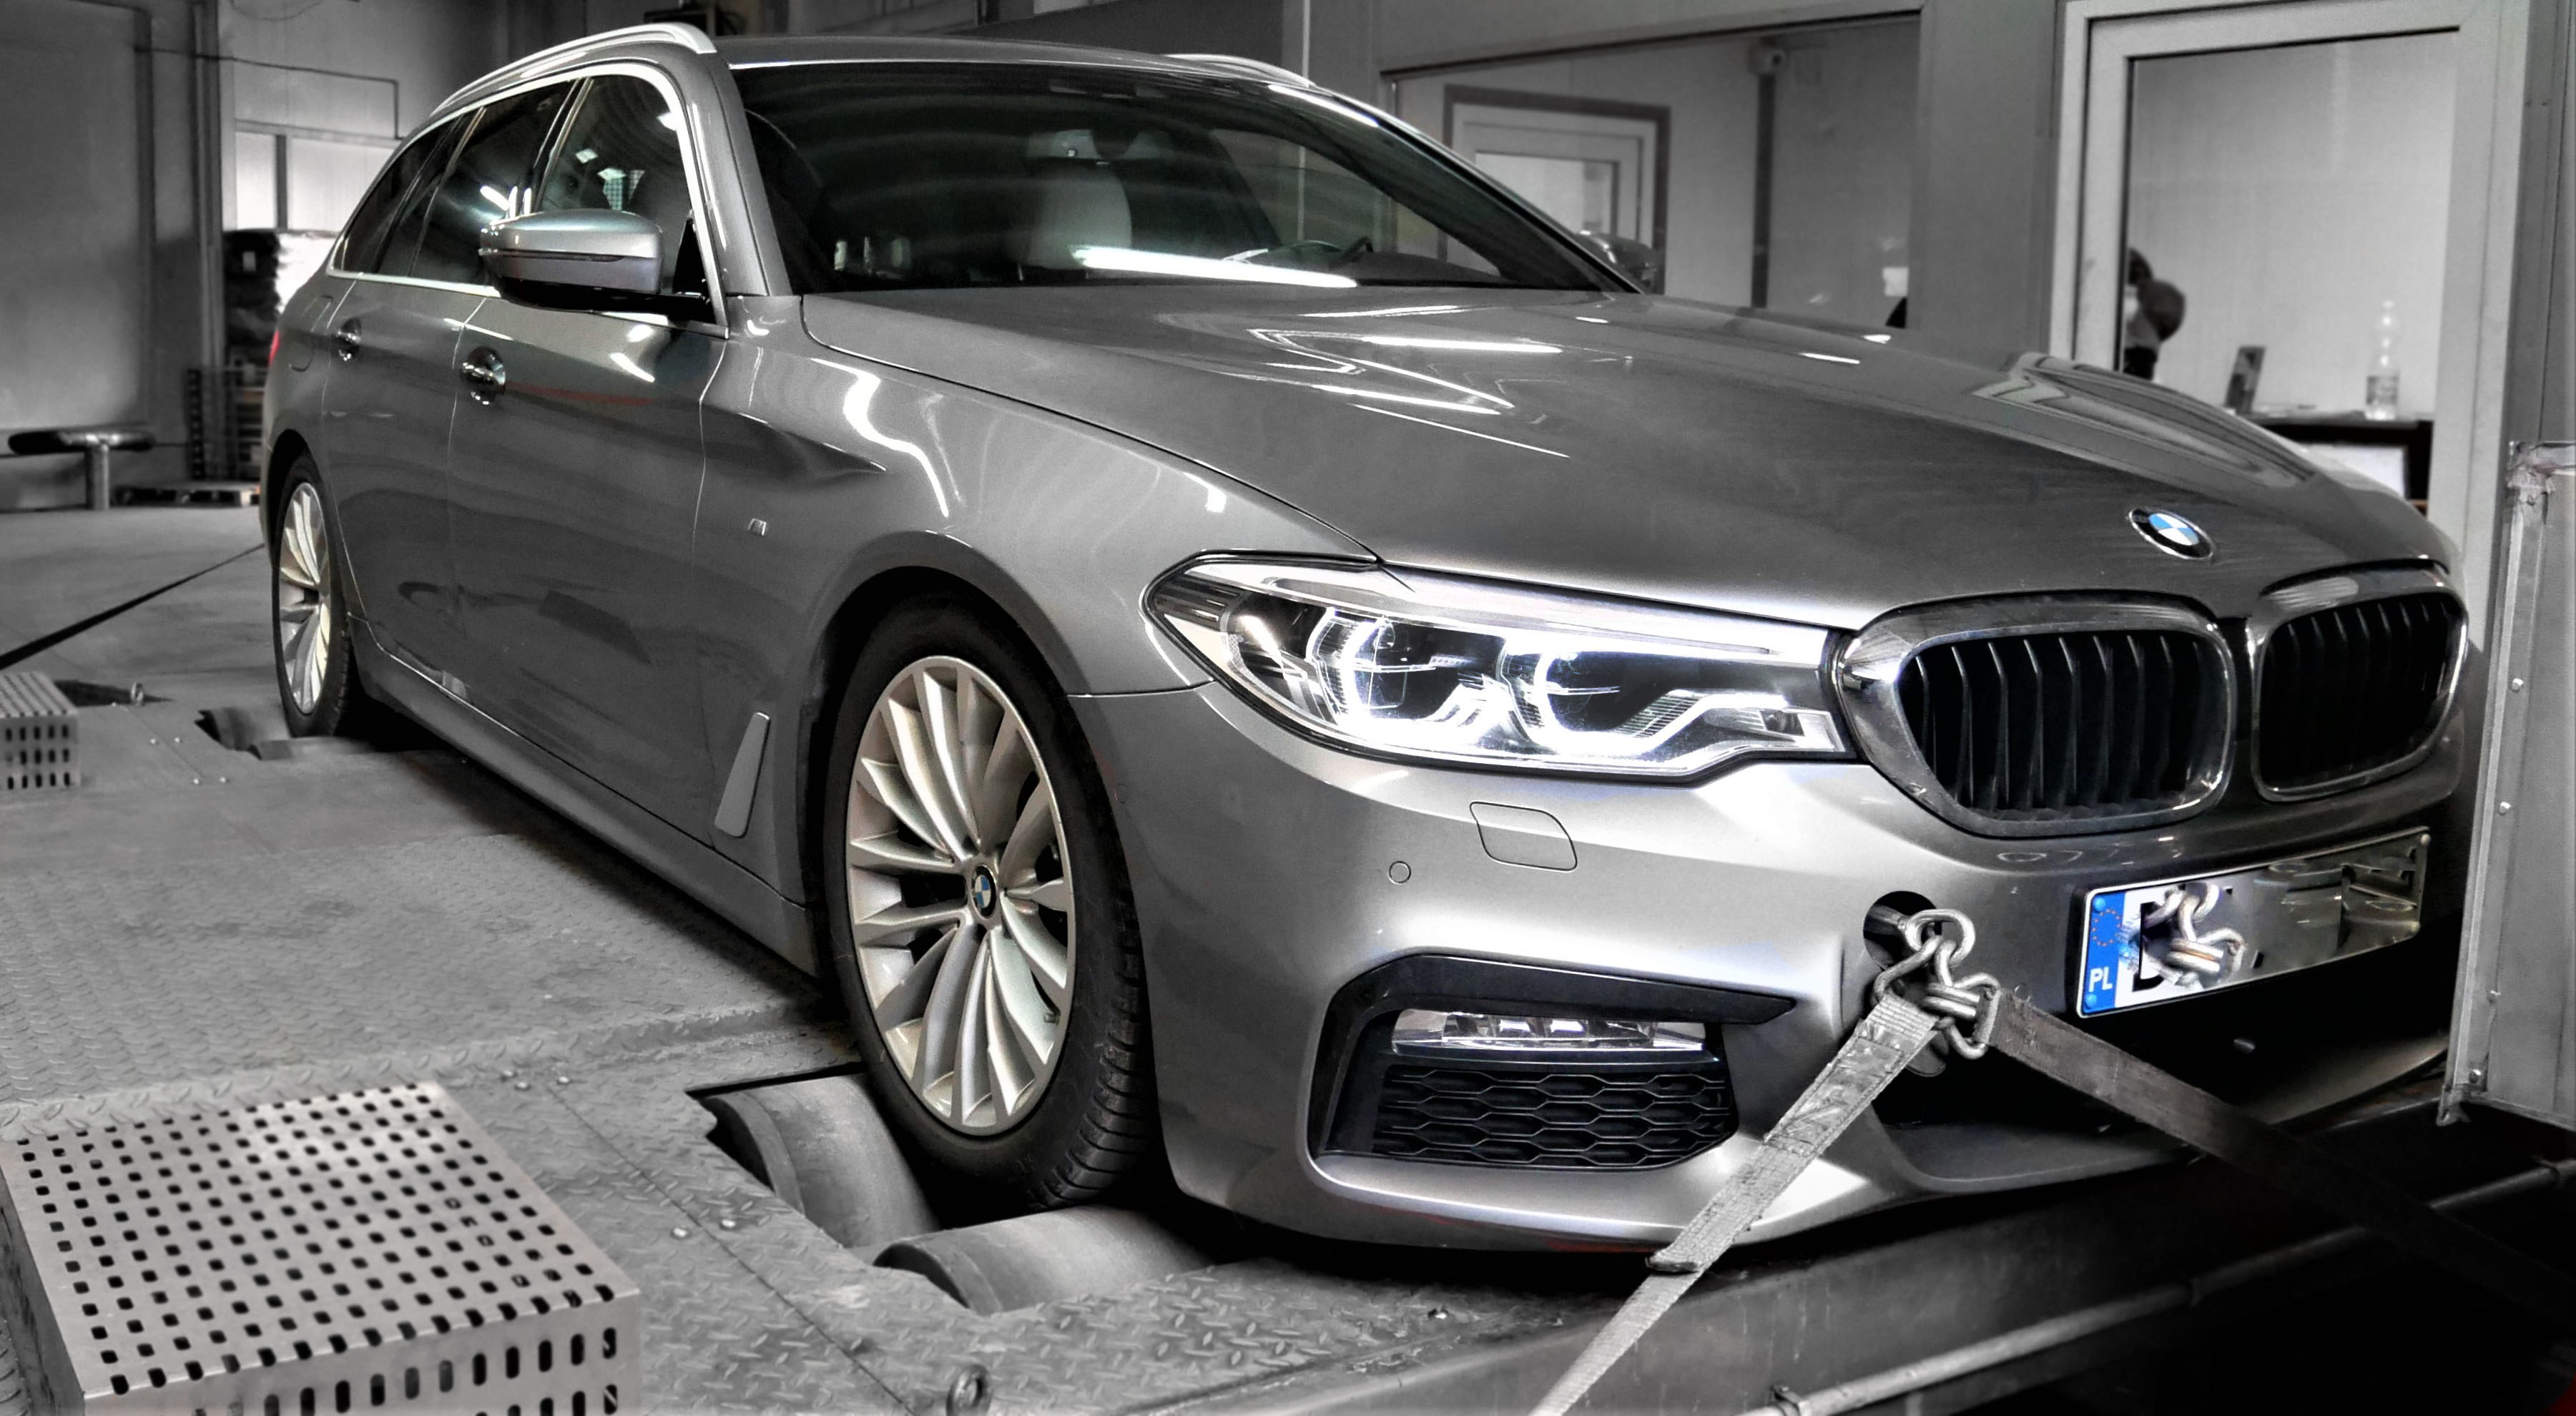 CHIPTUNING BMW G31 525d 231KM STAGE 1